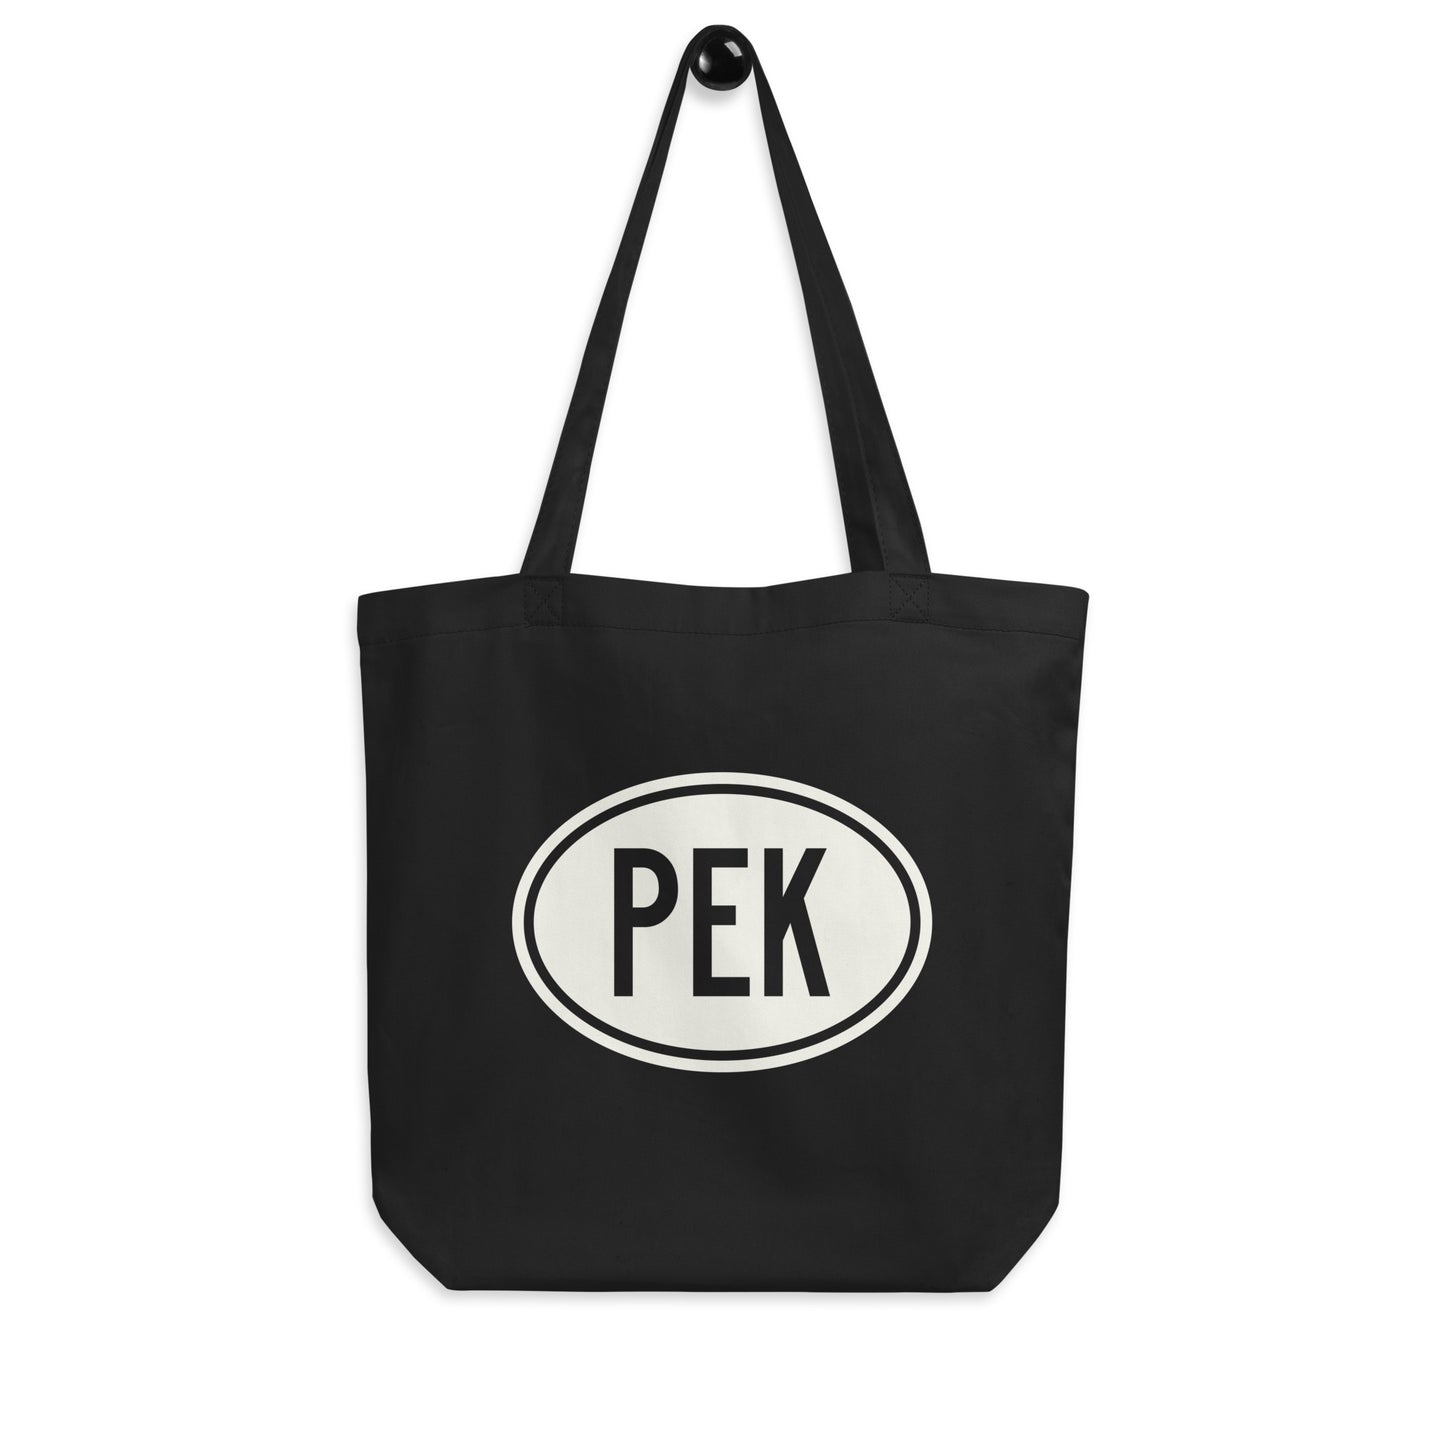 Unique Travel Gift Organic Tote - White Oval • PEK Beijing • YHM Designs - Image 04